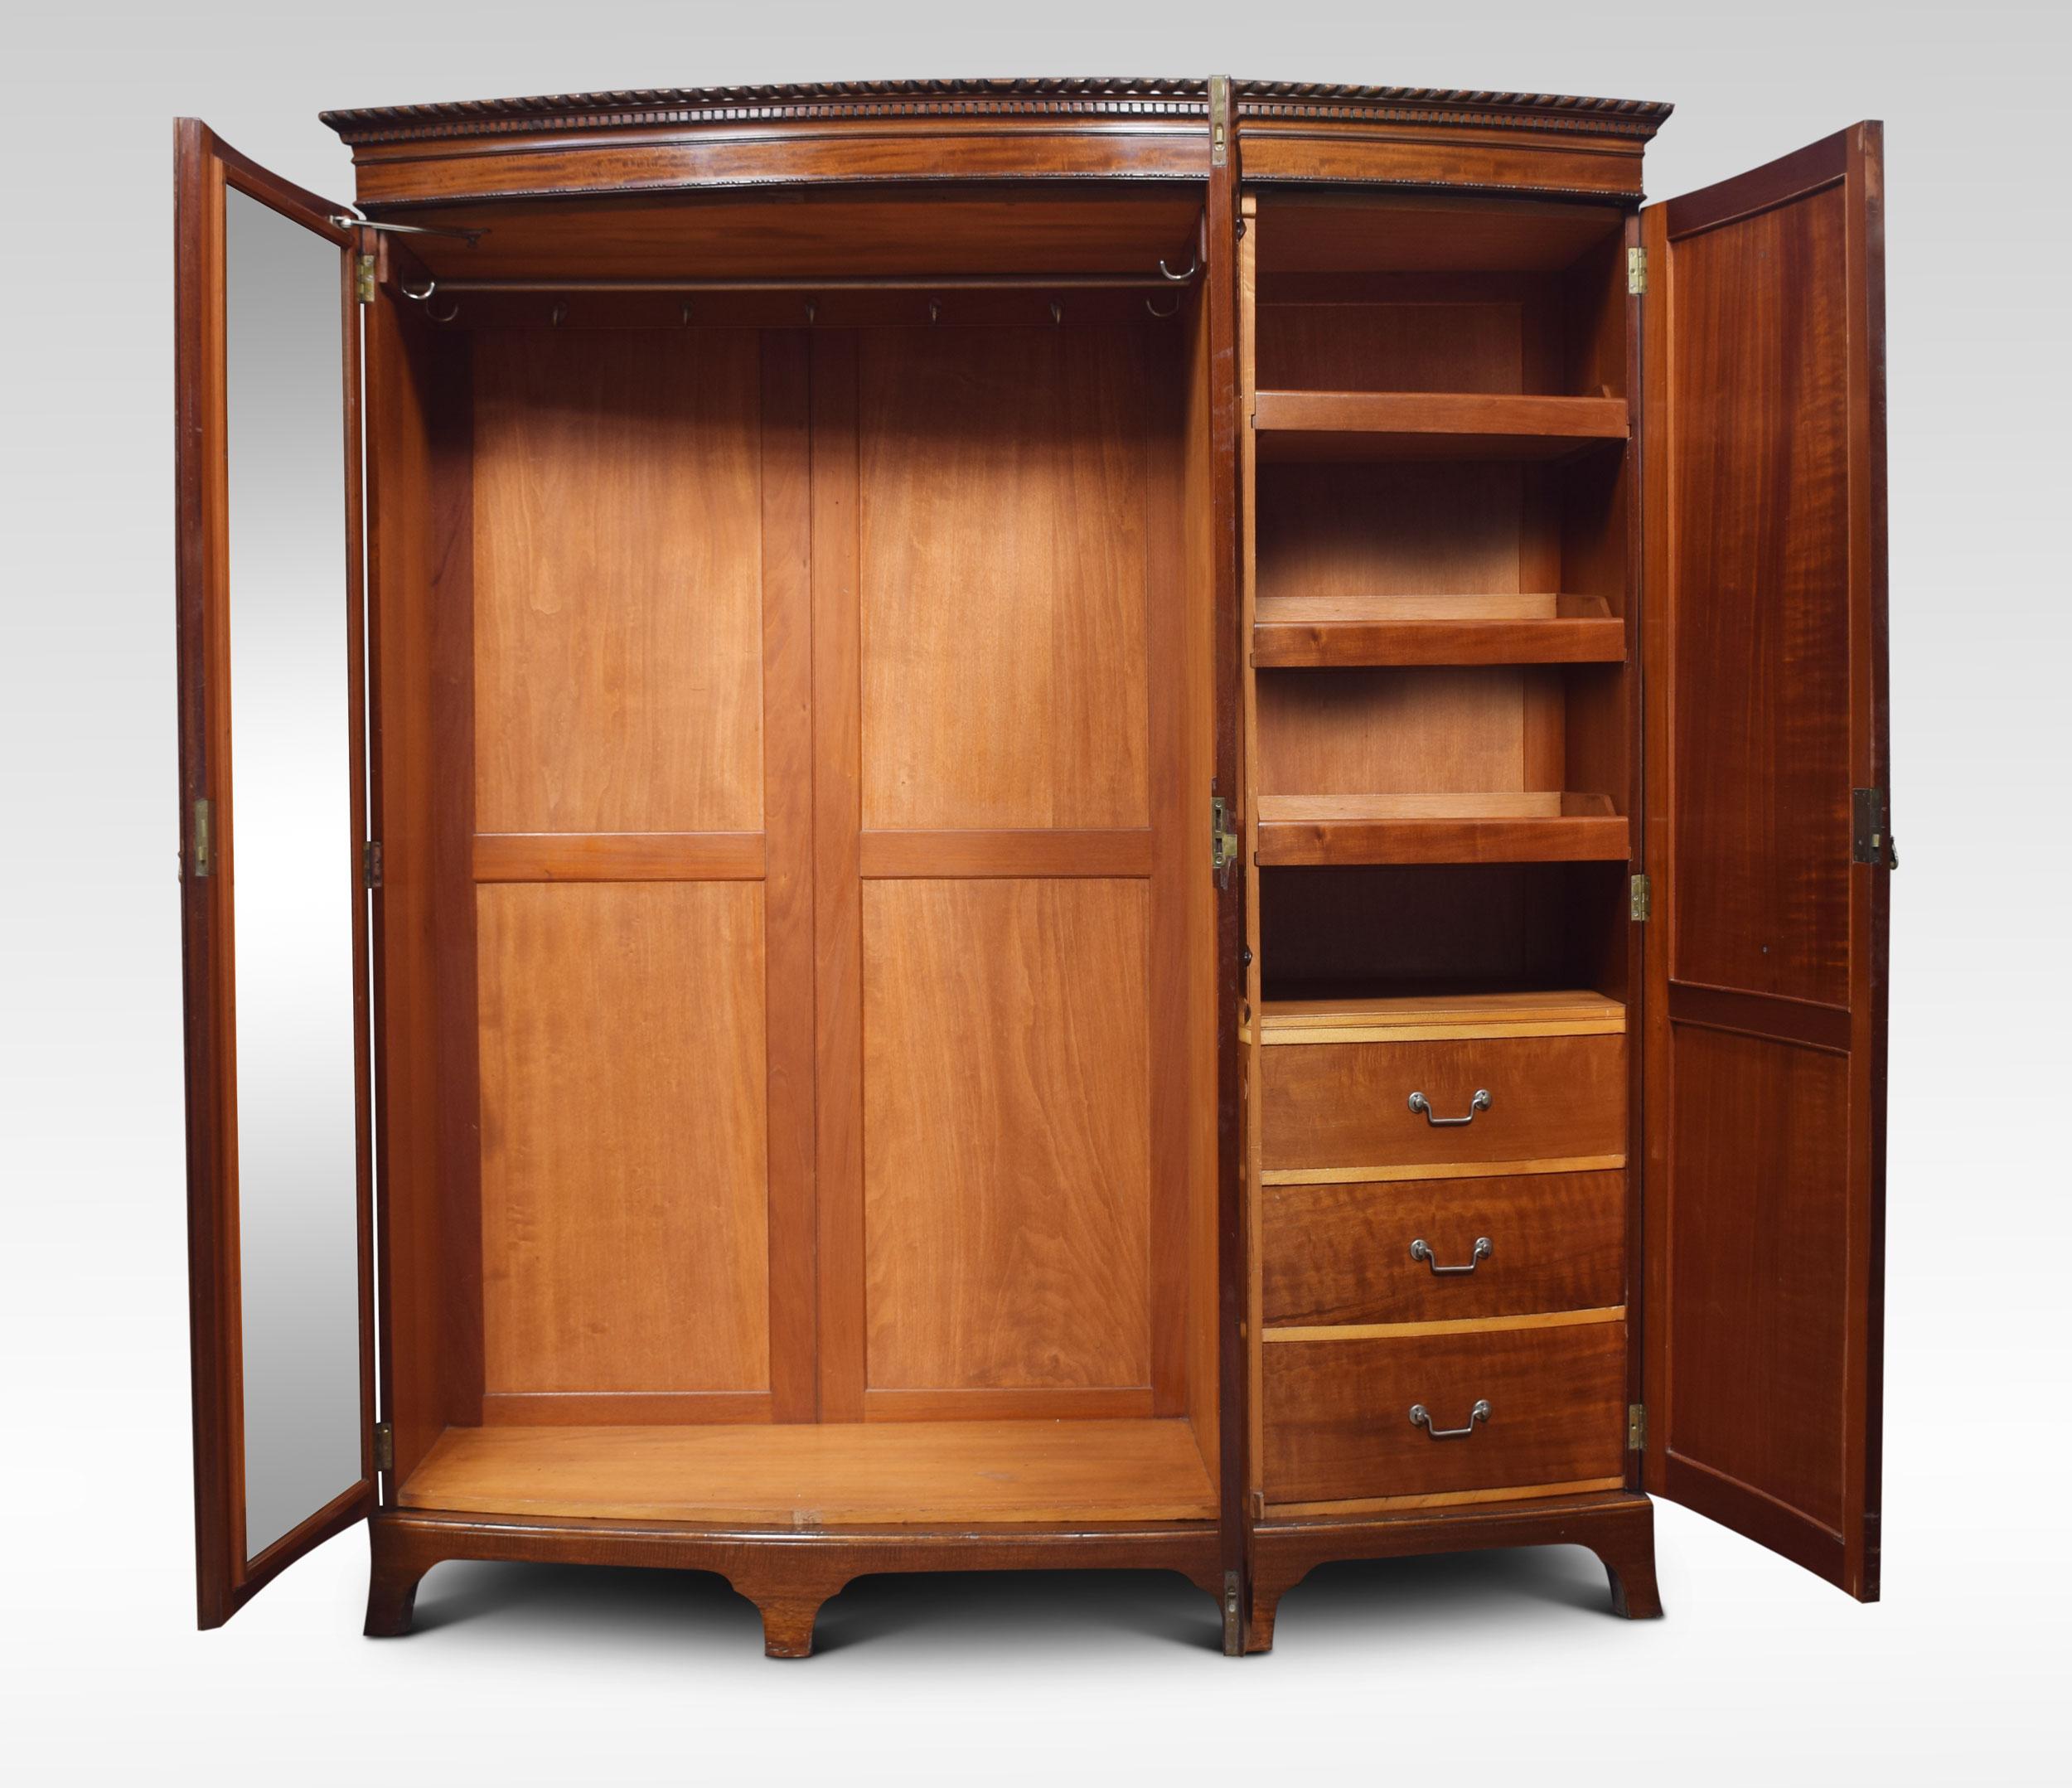 Mahogany bow fronted compactum wardrobe, the carved moulded cornice above three long paneled doors opening to reveal a fitted interior of sliding trays, draws and large hanging rail, all raised up on bracket feet.
Dimensions:
Height 82.5